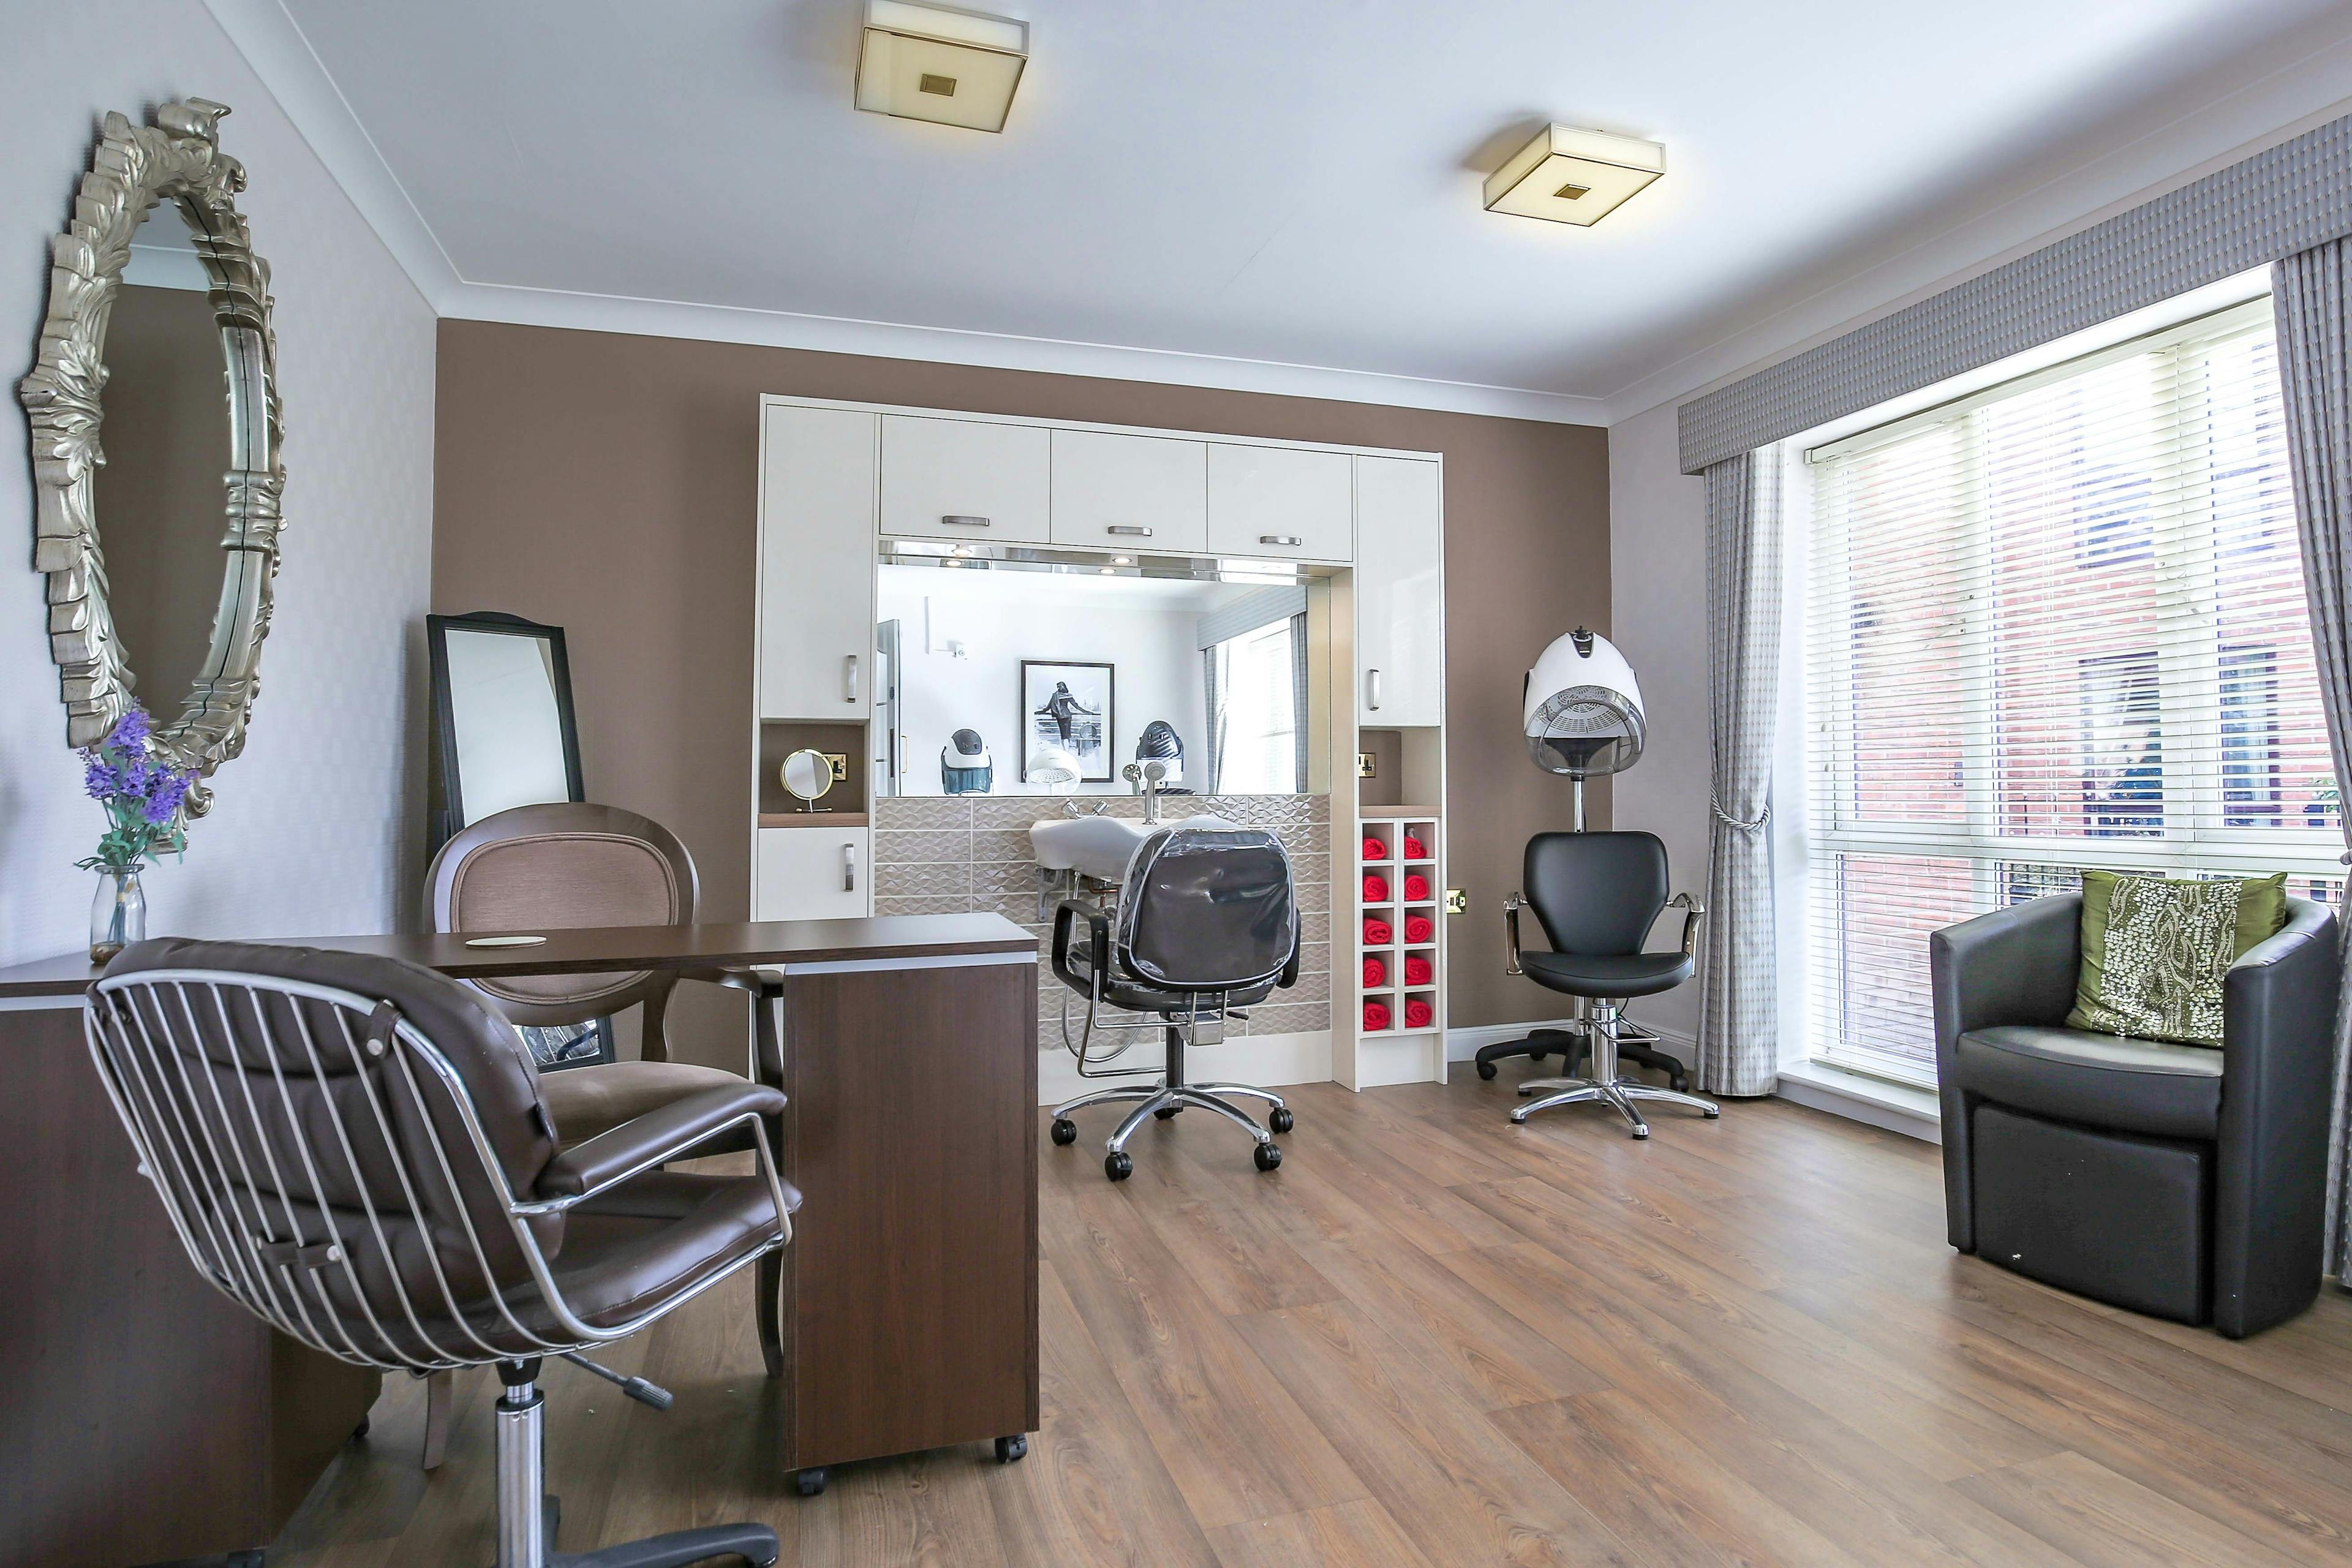 Salon at Station Court Care Home in Ashington, Northumberland